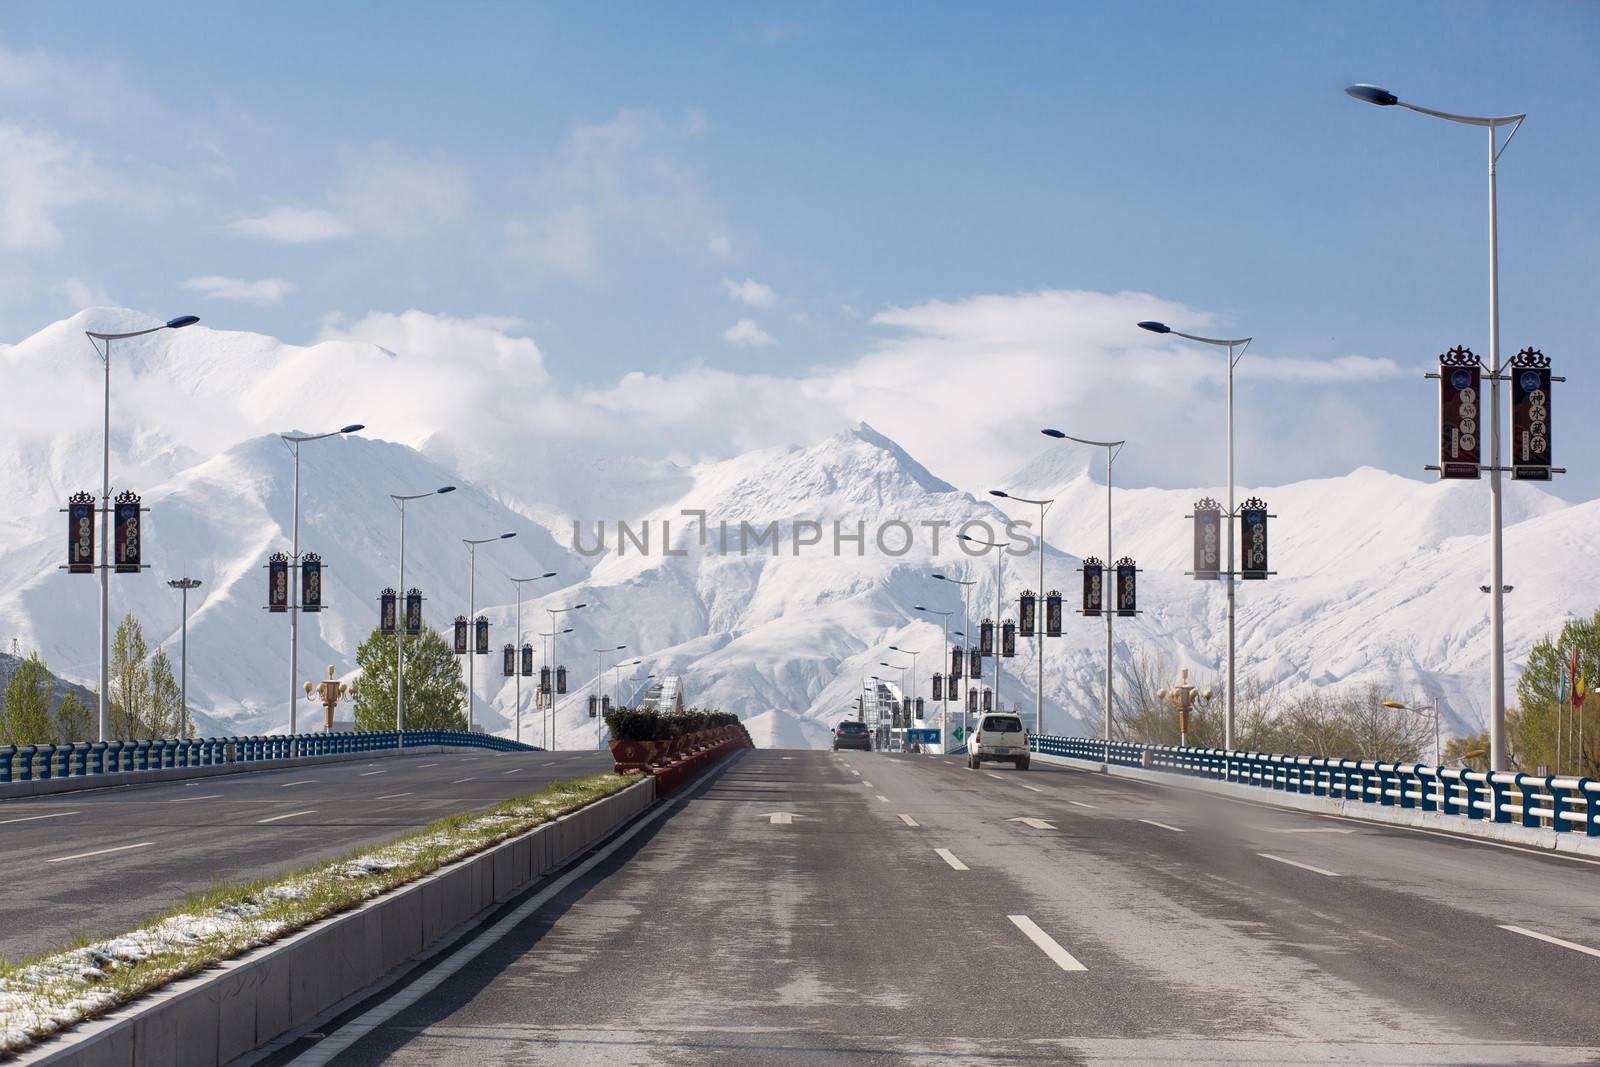 Leaving Lhasa on an empty Friendship Highway with a stunning view of the Himalayan mountain chain in the background. Tibet, China 2013.